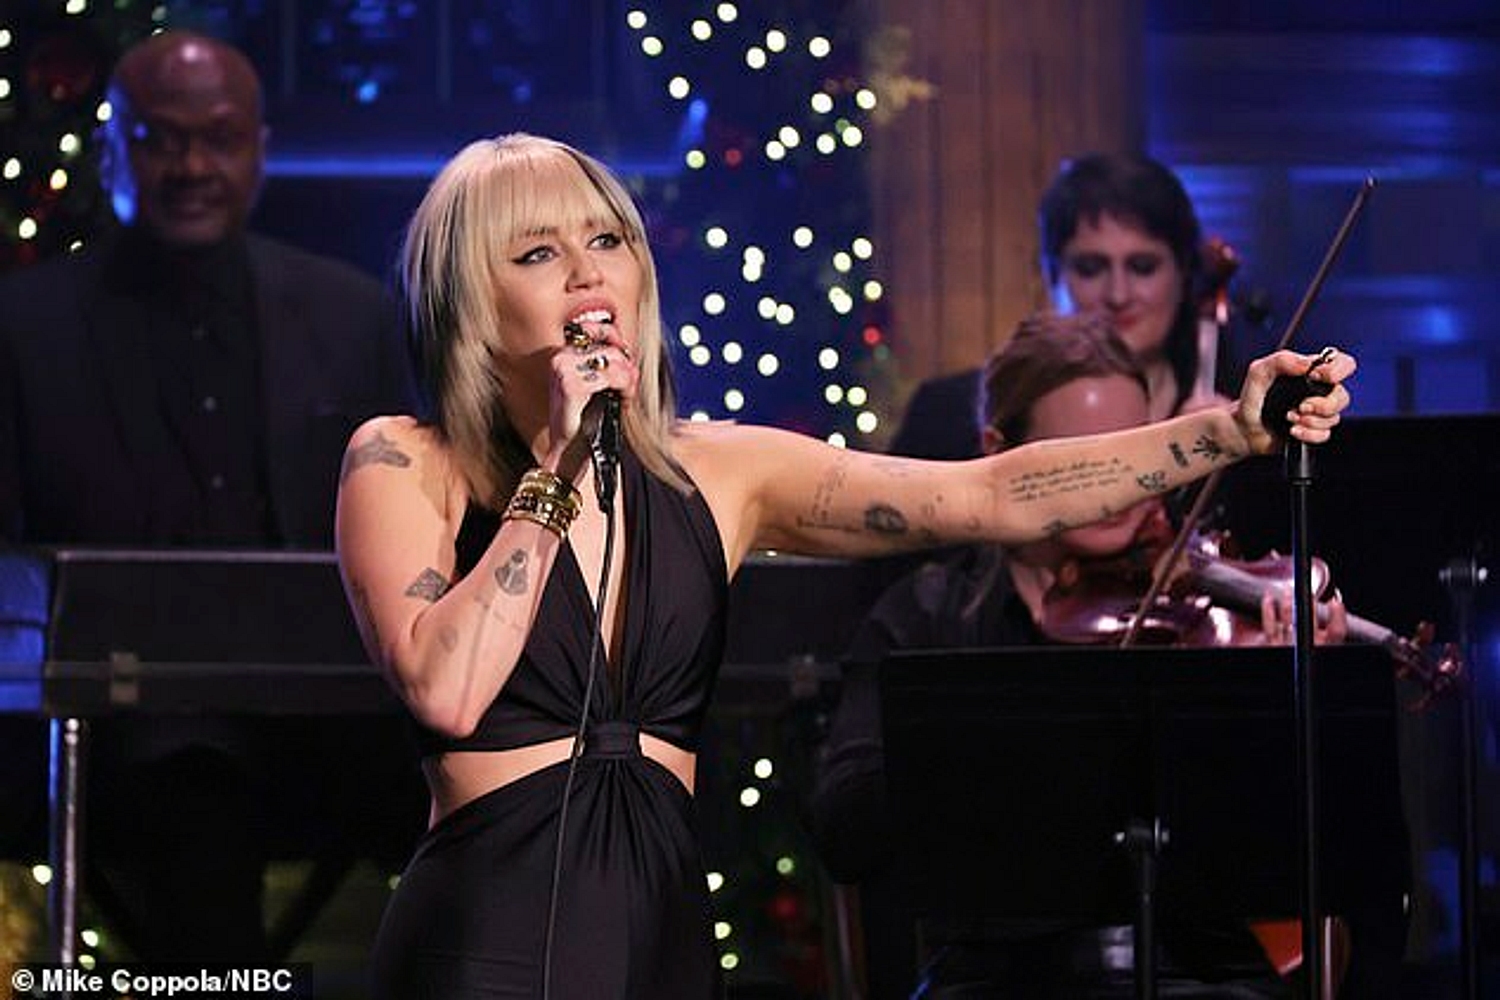 Watch Miley Cyrus cover Yvonne Fair’s ‘It Should Have Been Me’